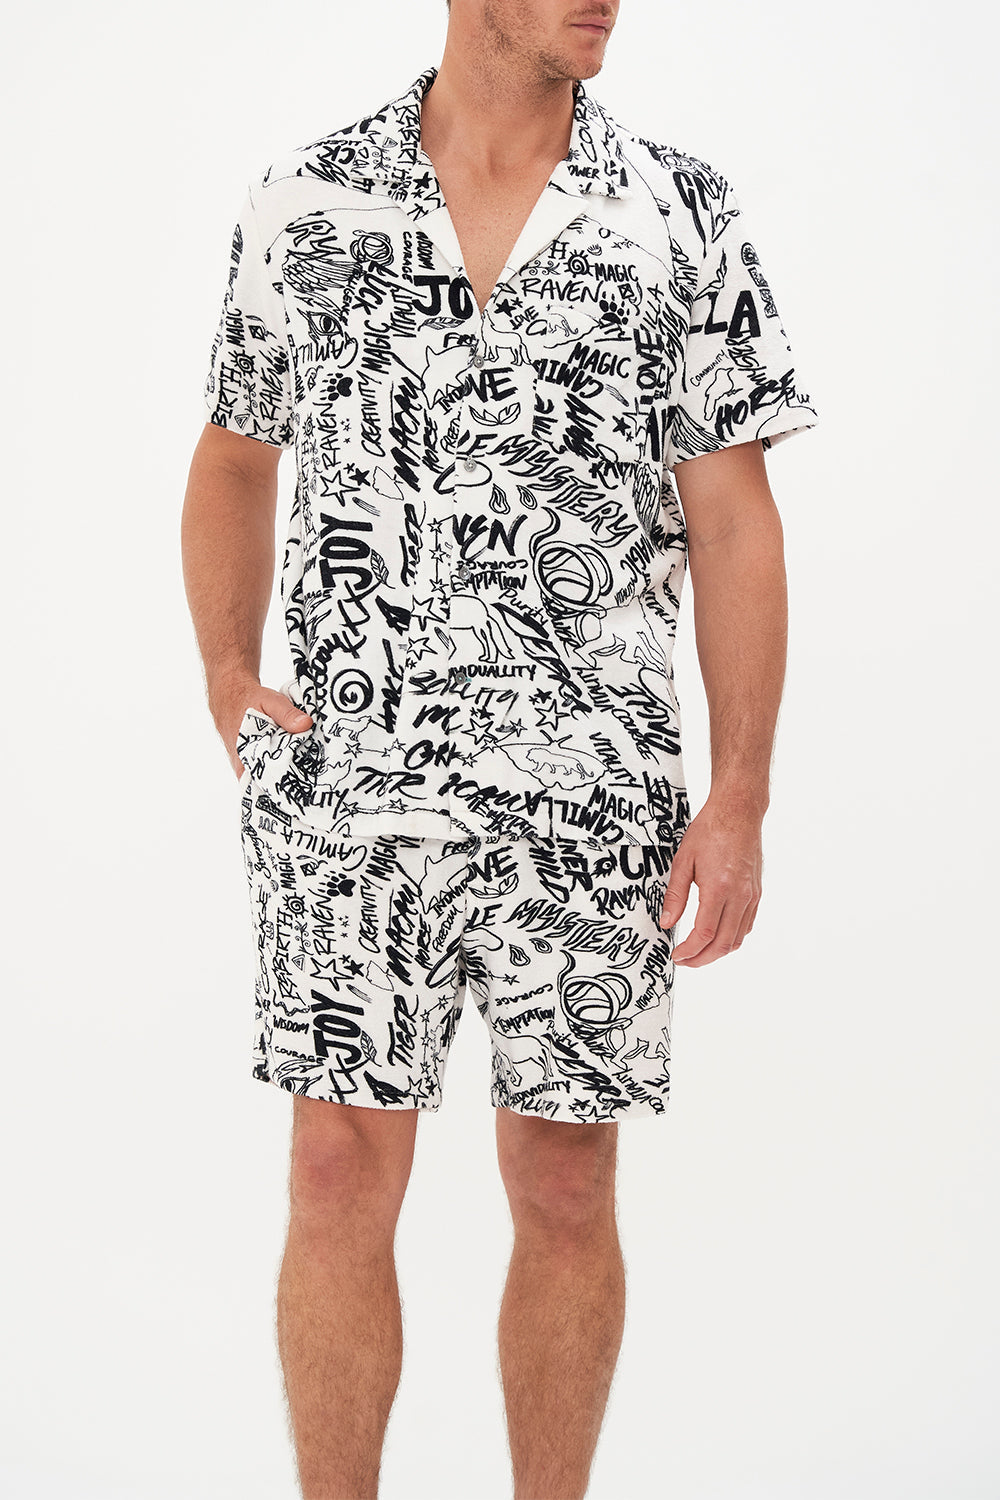 TERRY TOWELLING SHORT SLEEVE BUTTON UP SHIRT CREATURE FEATURE